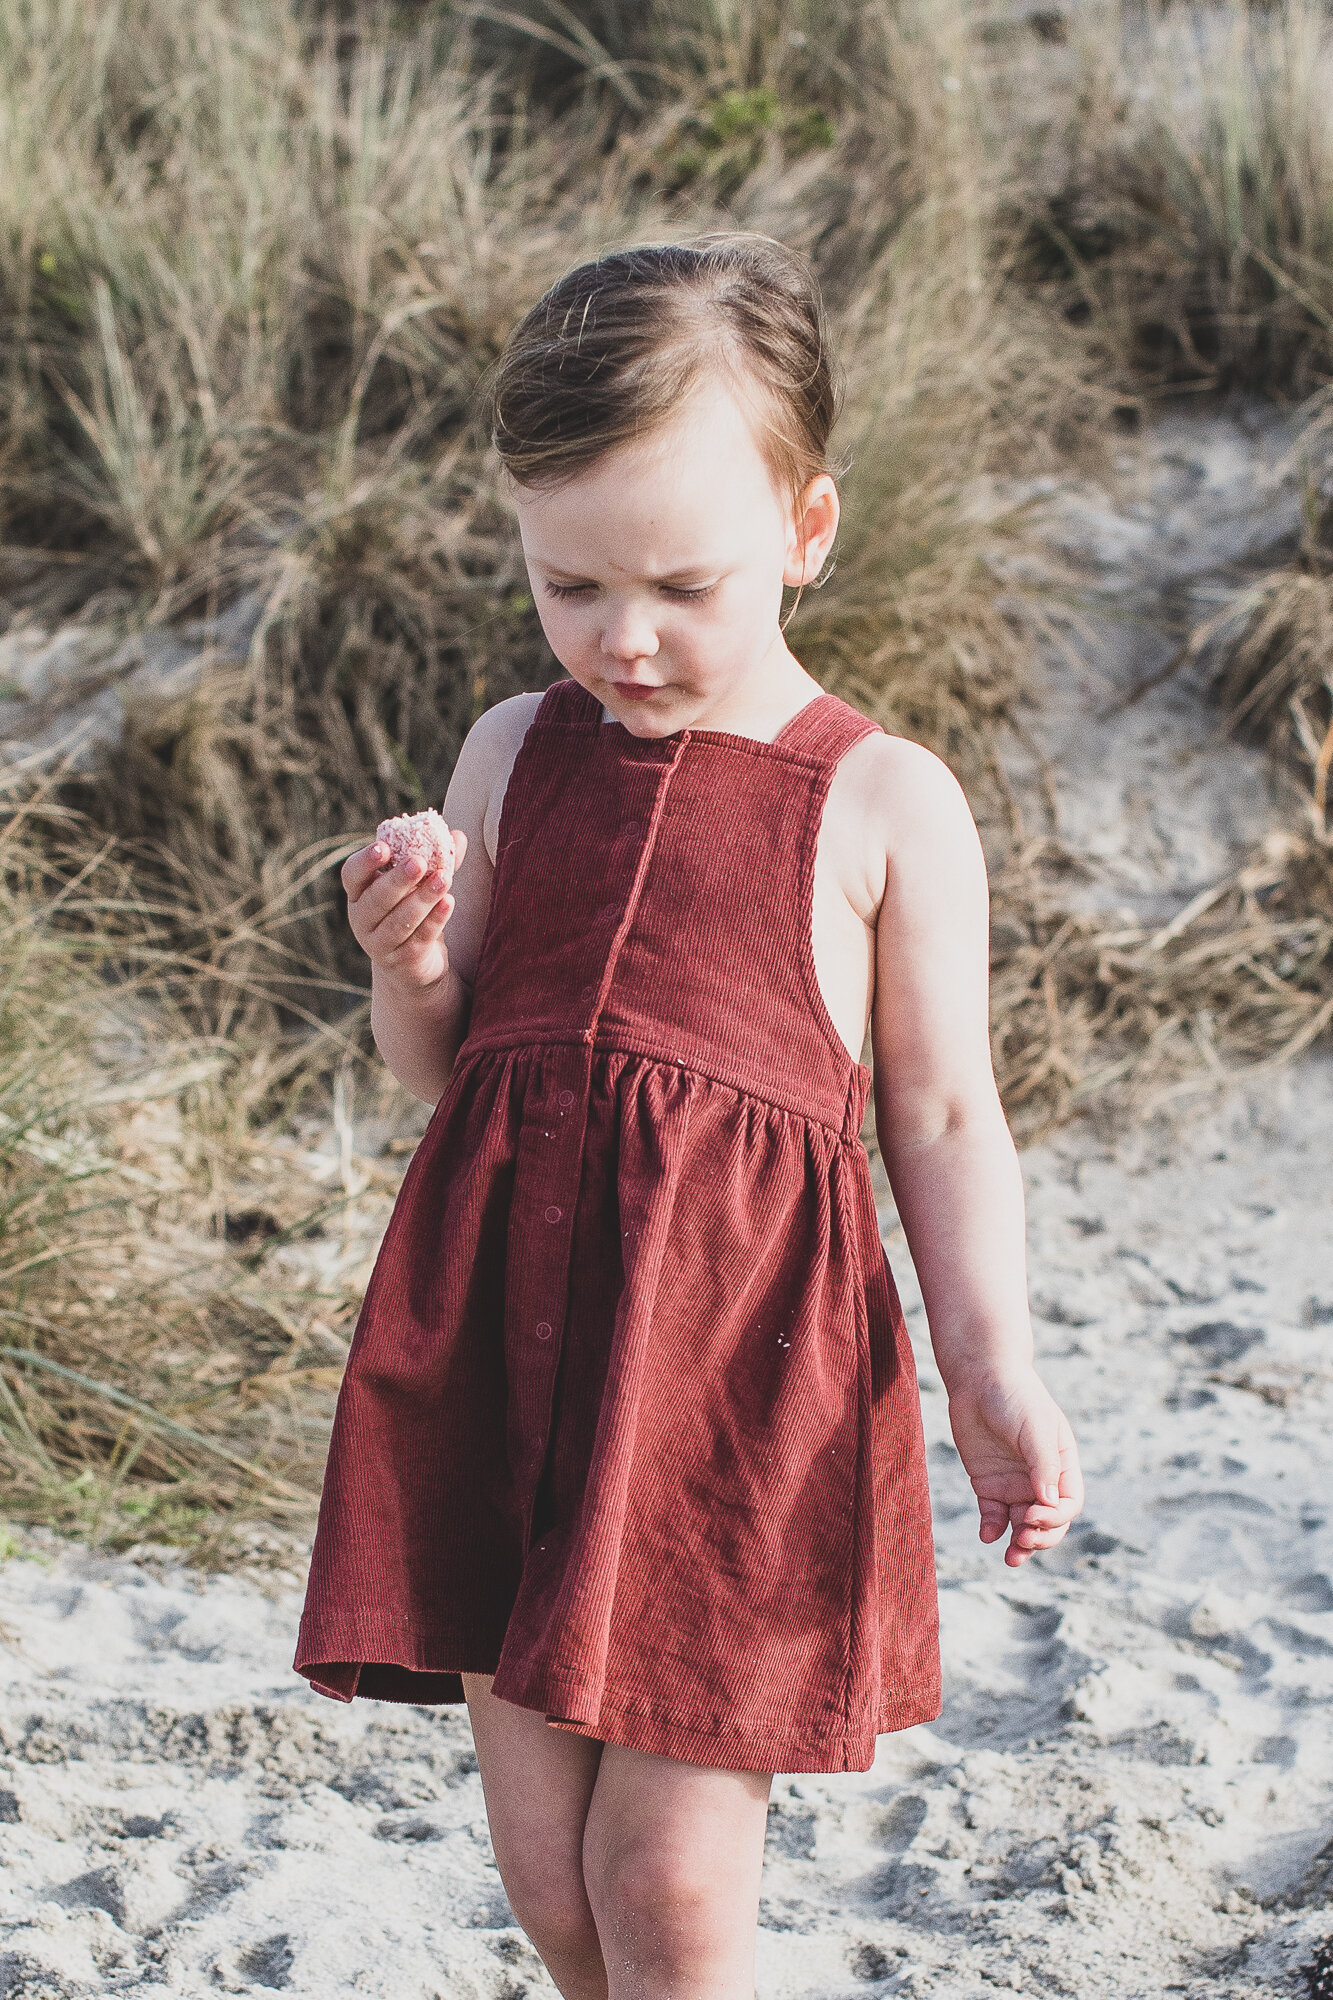  Image of Astrid taken for a collaboration between Little Bird Organics and Nature Baby. 